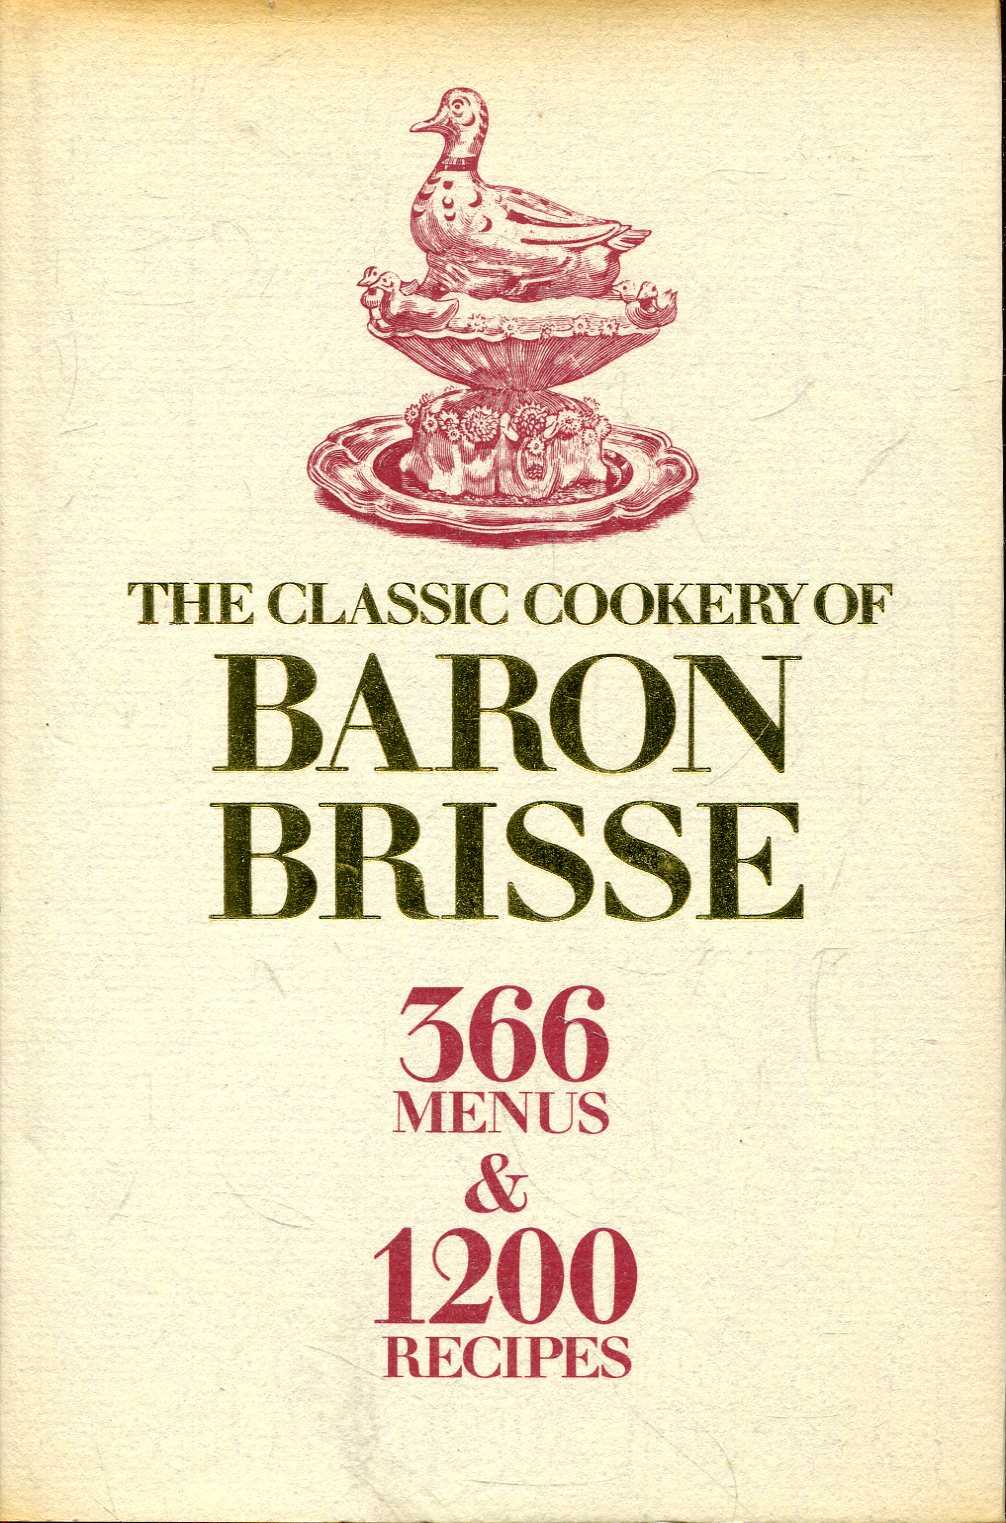 Image for The Classic Cookery of Baron Brisse: 366 Menus & 1200 Recipes in French & English (English and French Edition)